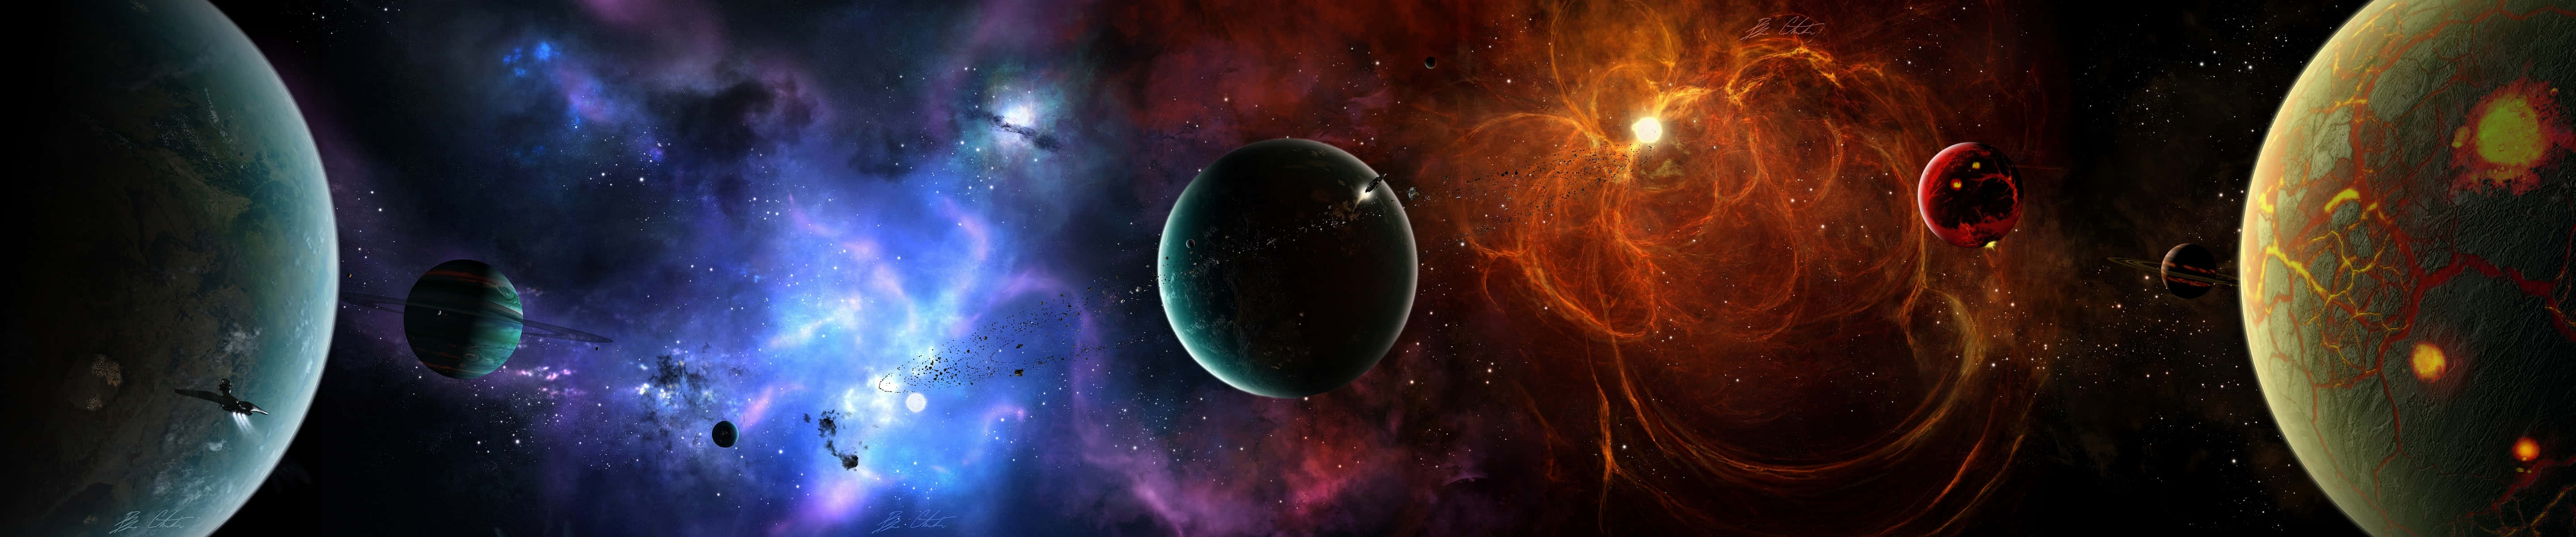 A Space Scene With Many Planets And Stars Wallpaper